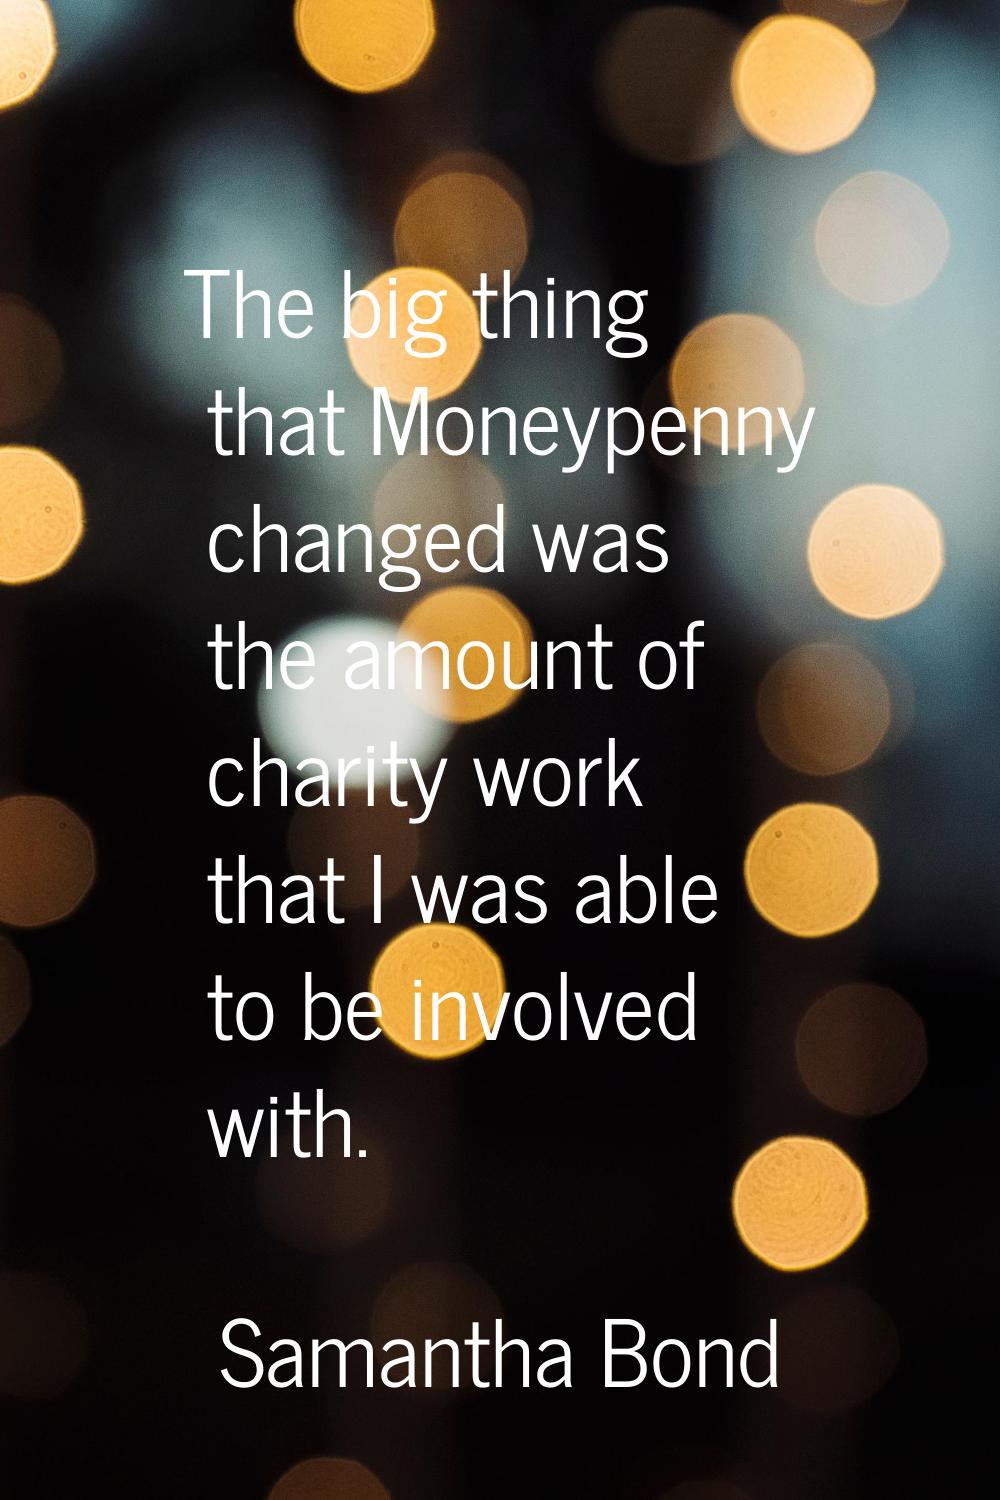 The big thing that Moneypenny changed was the amount of charity work that I was able to be involved